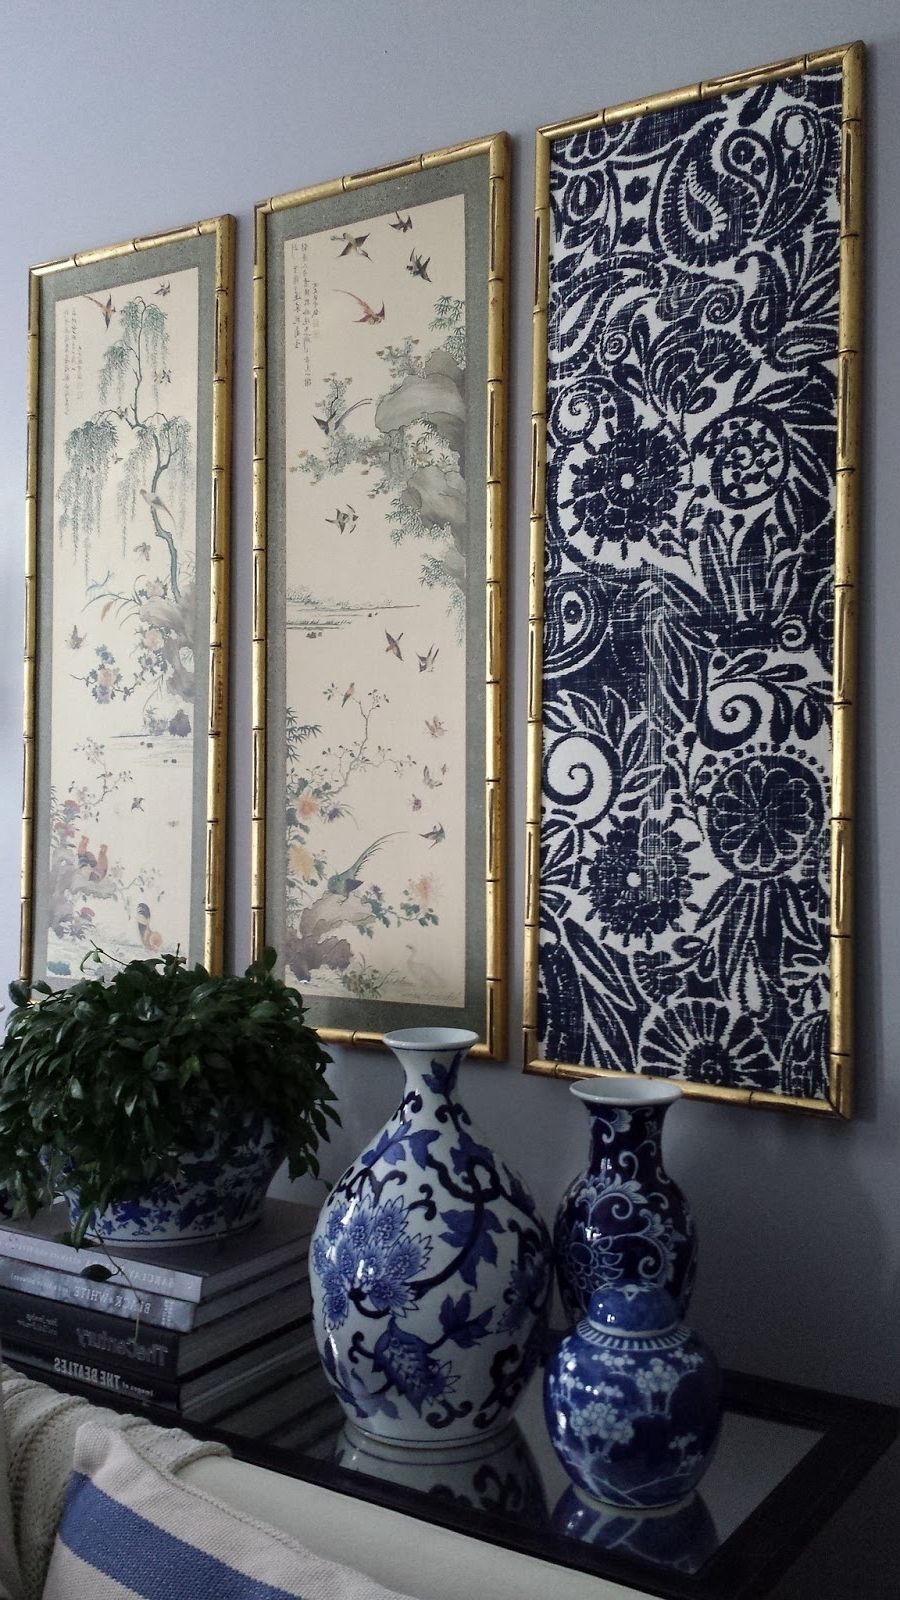 Focal Point Styling: Diy Indigo Wall Art With Framed Fabric Intended For Newest Framed Fabric Wall Art (View 4 of 15)